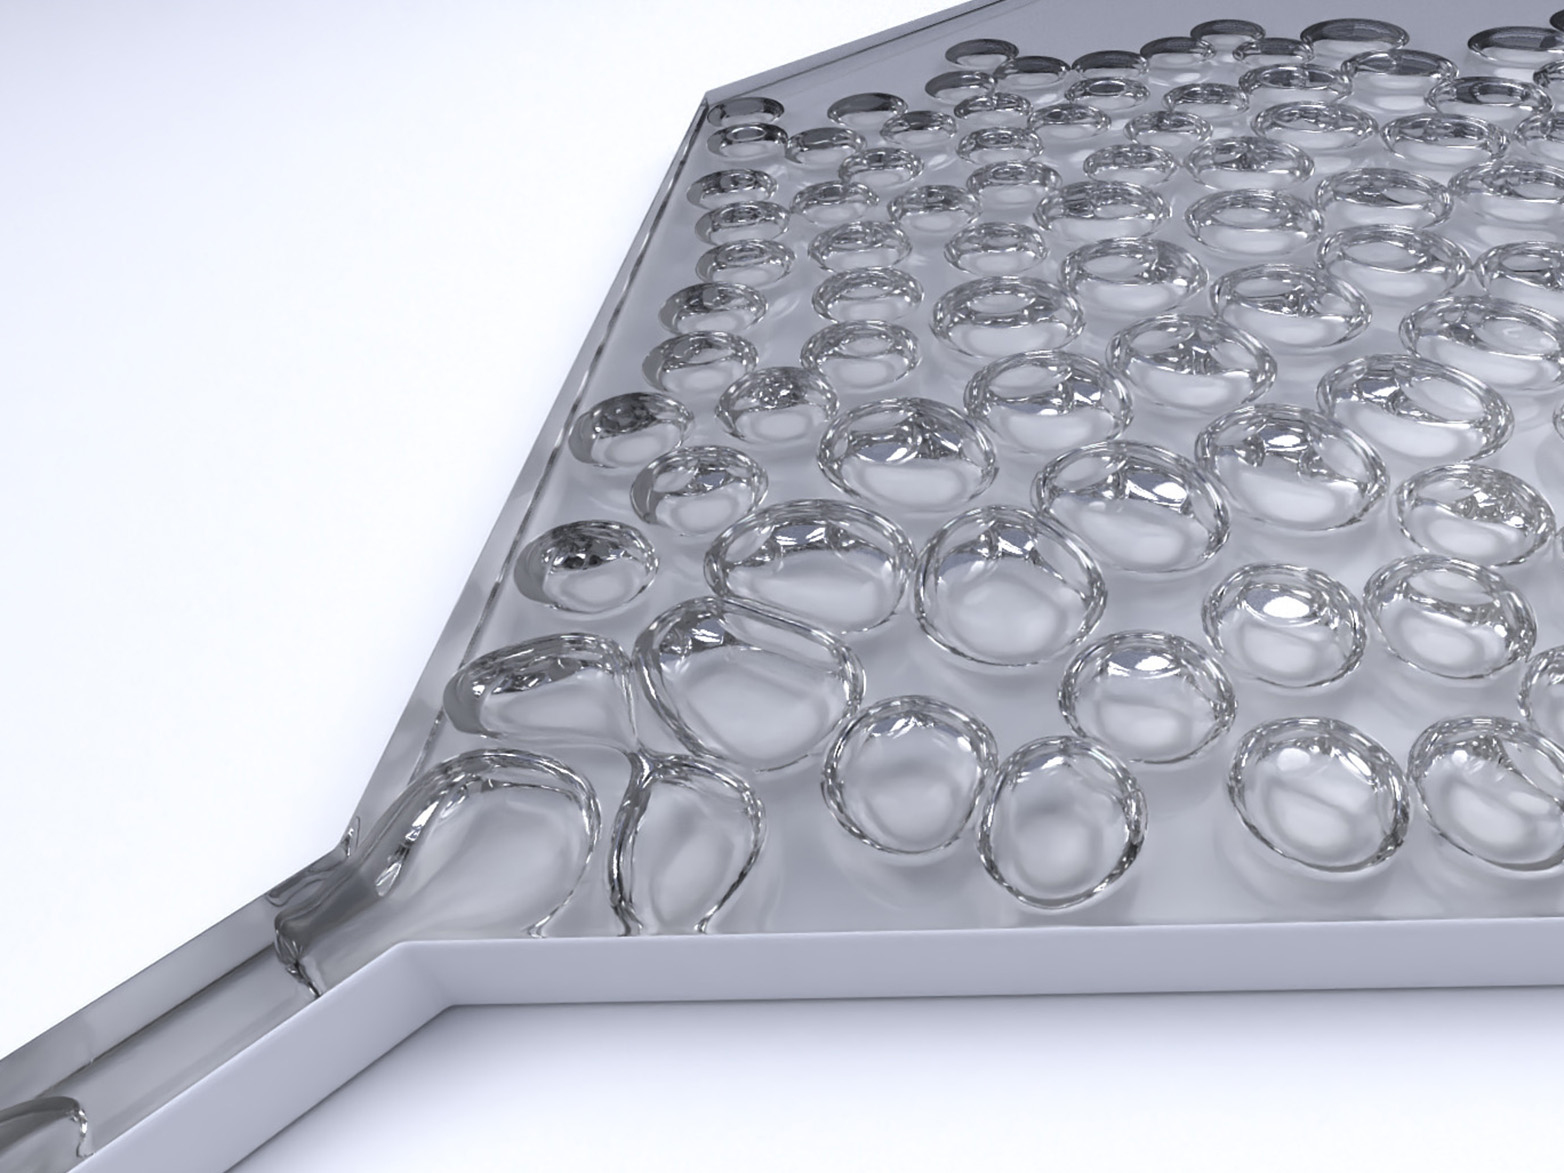 Enlarged view: Bubbles in a microfluidic array. (Illustrations: ETH Zurich / Harvard University / CSCS)